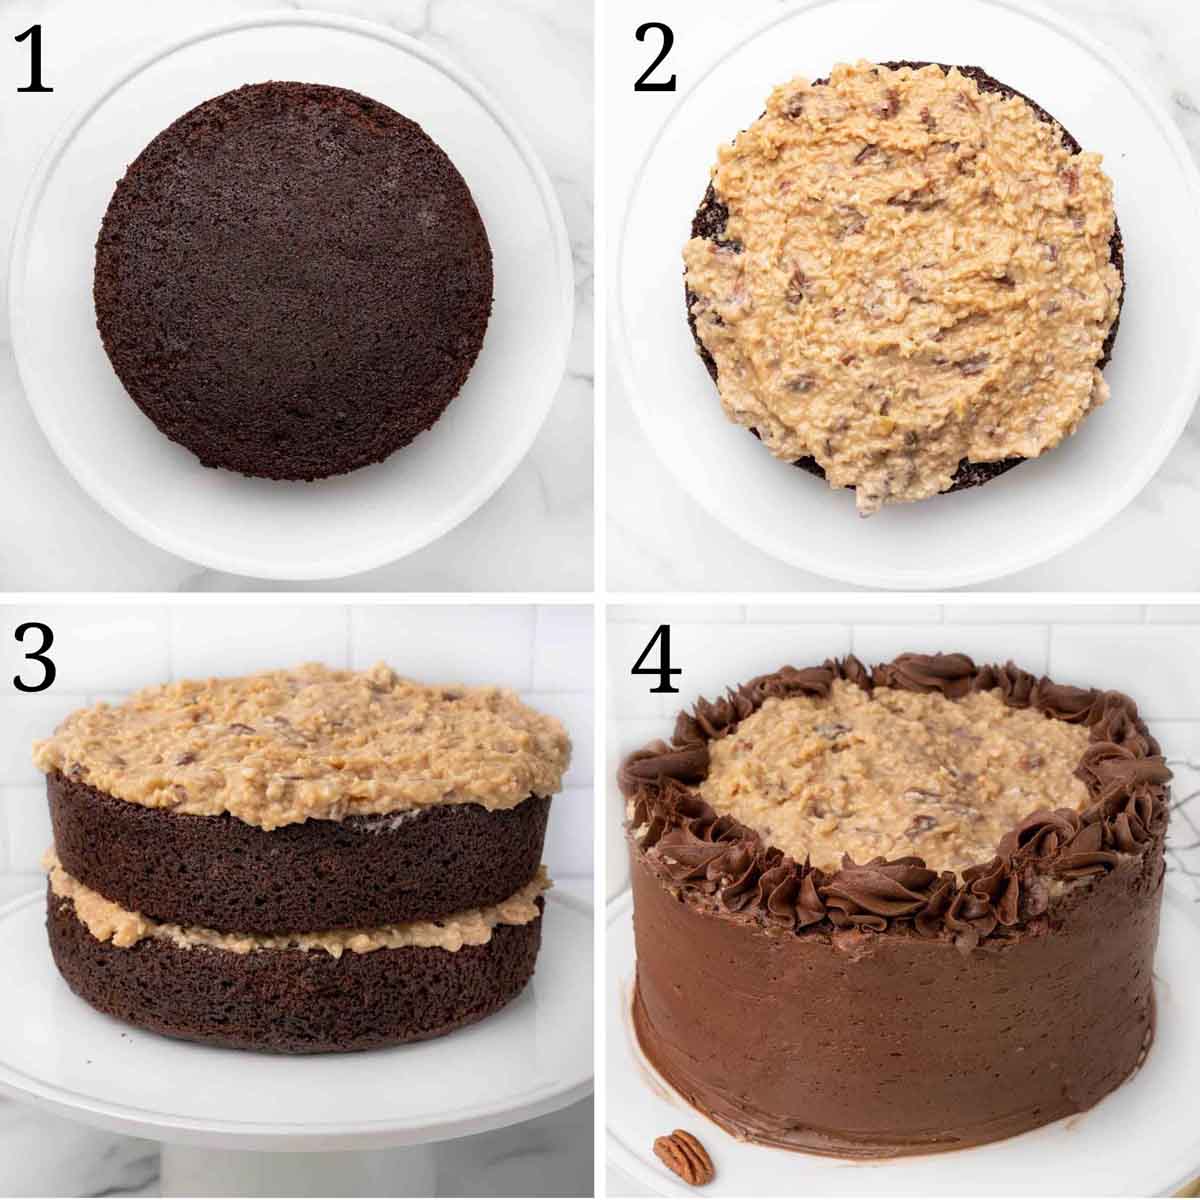 4 images showing how to assemble a german chocolate cake